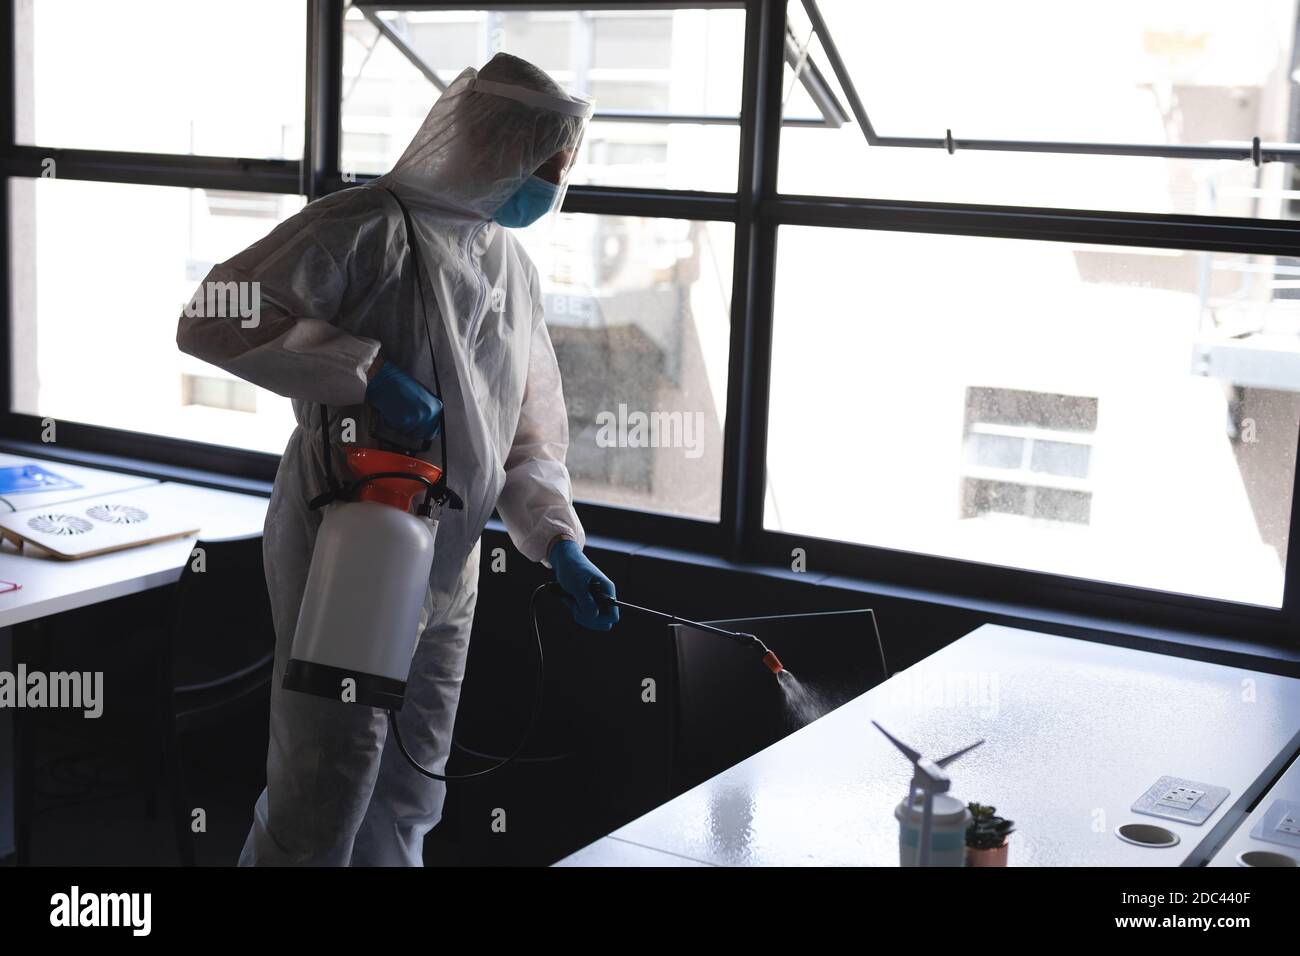 Health worker wearing protective clothes cleaning office using disinfectant Stock Photo